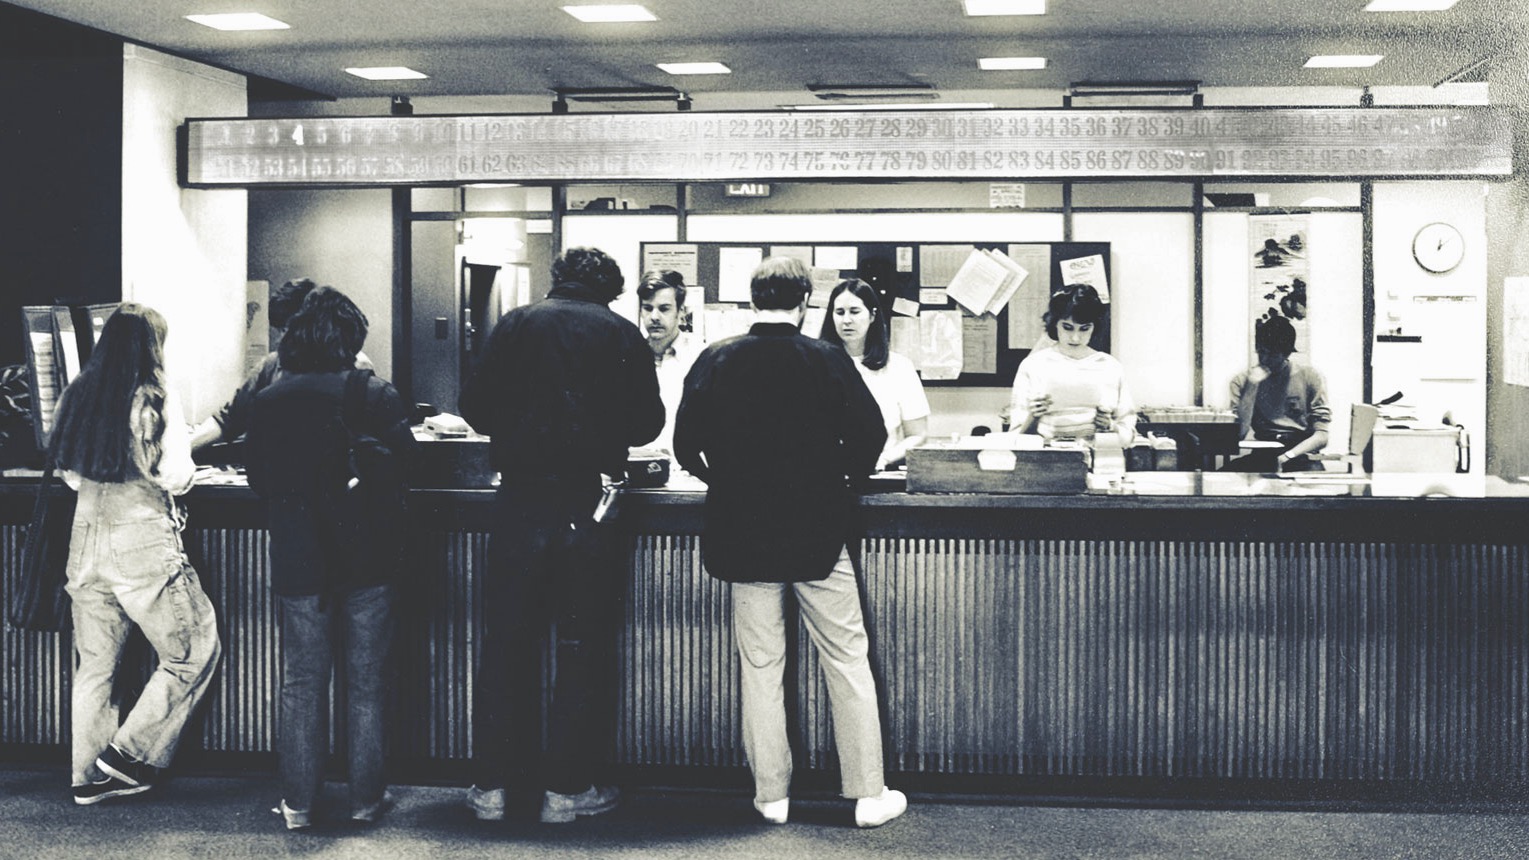 Patrons at the Olin circulation desk in 1972